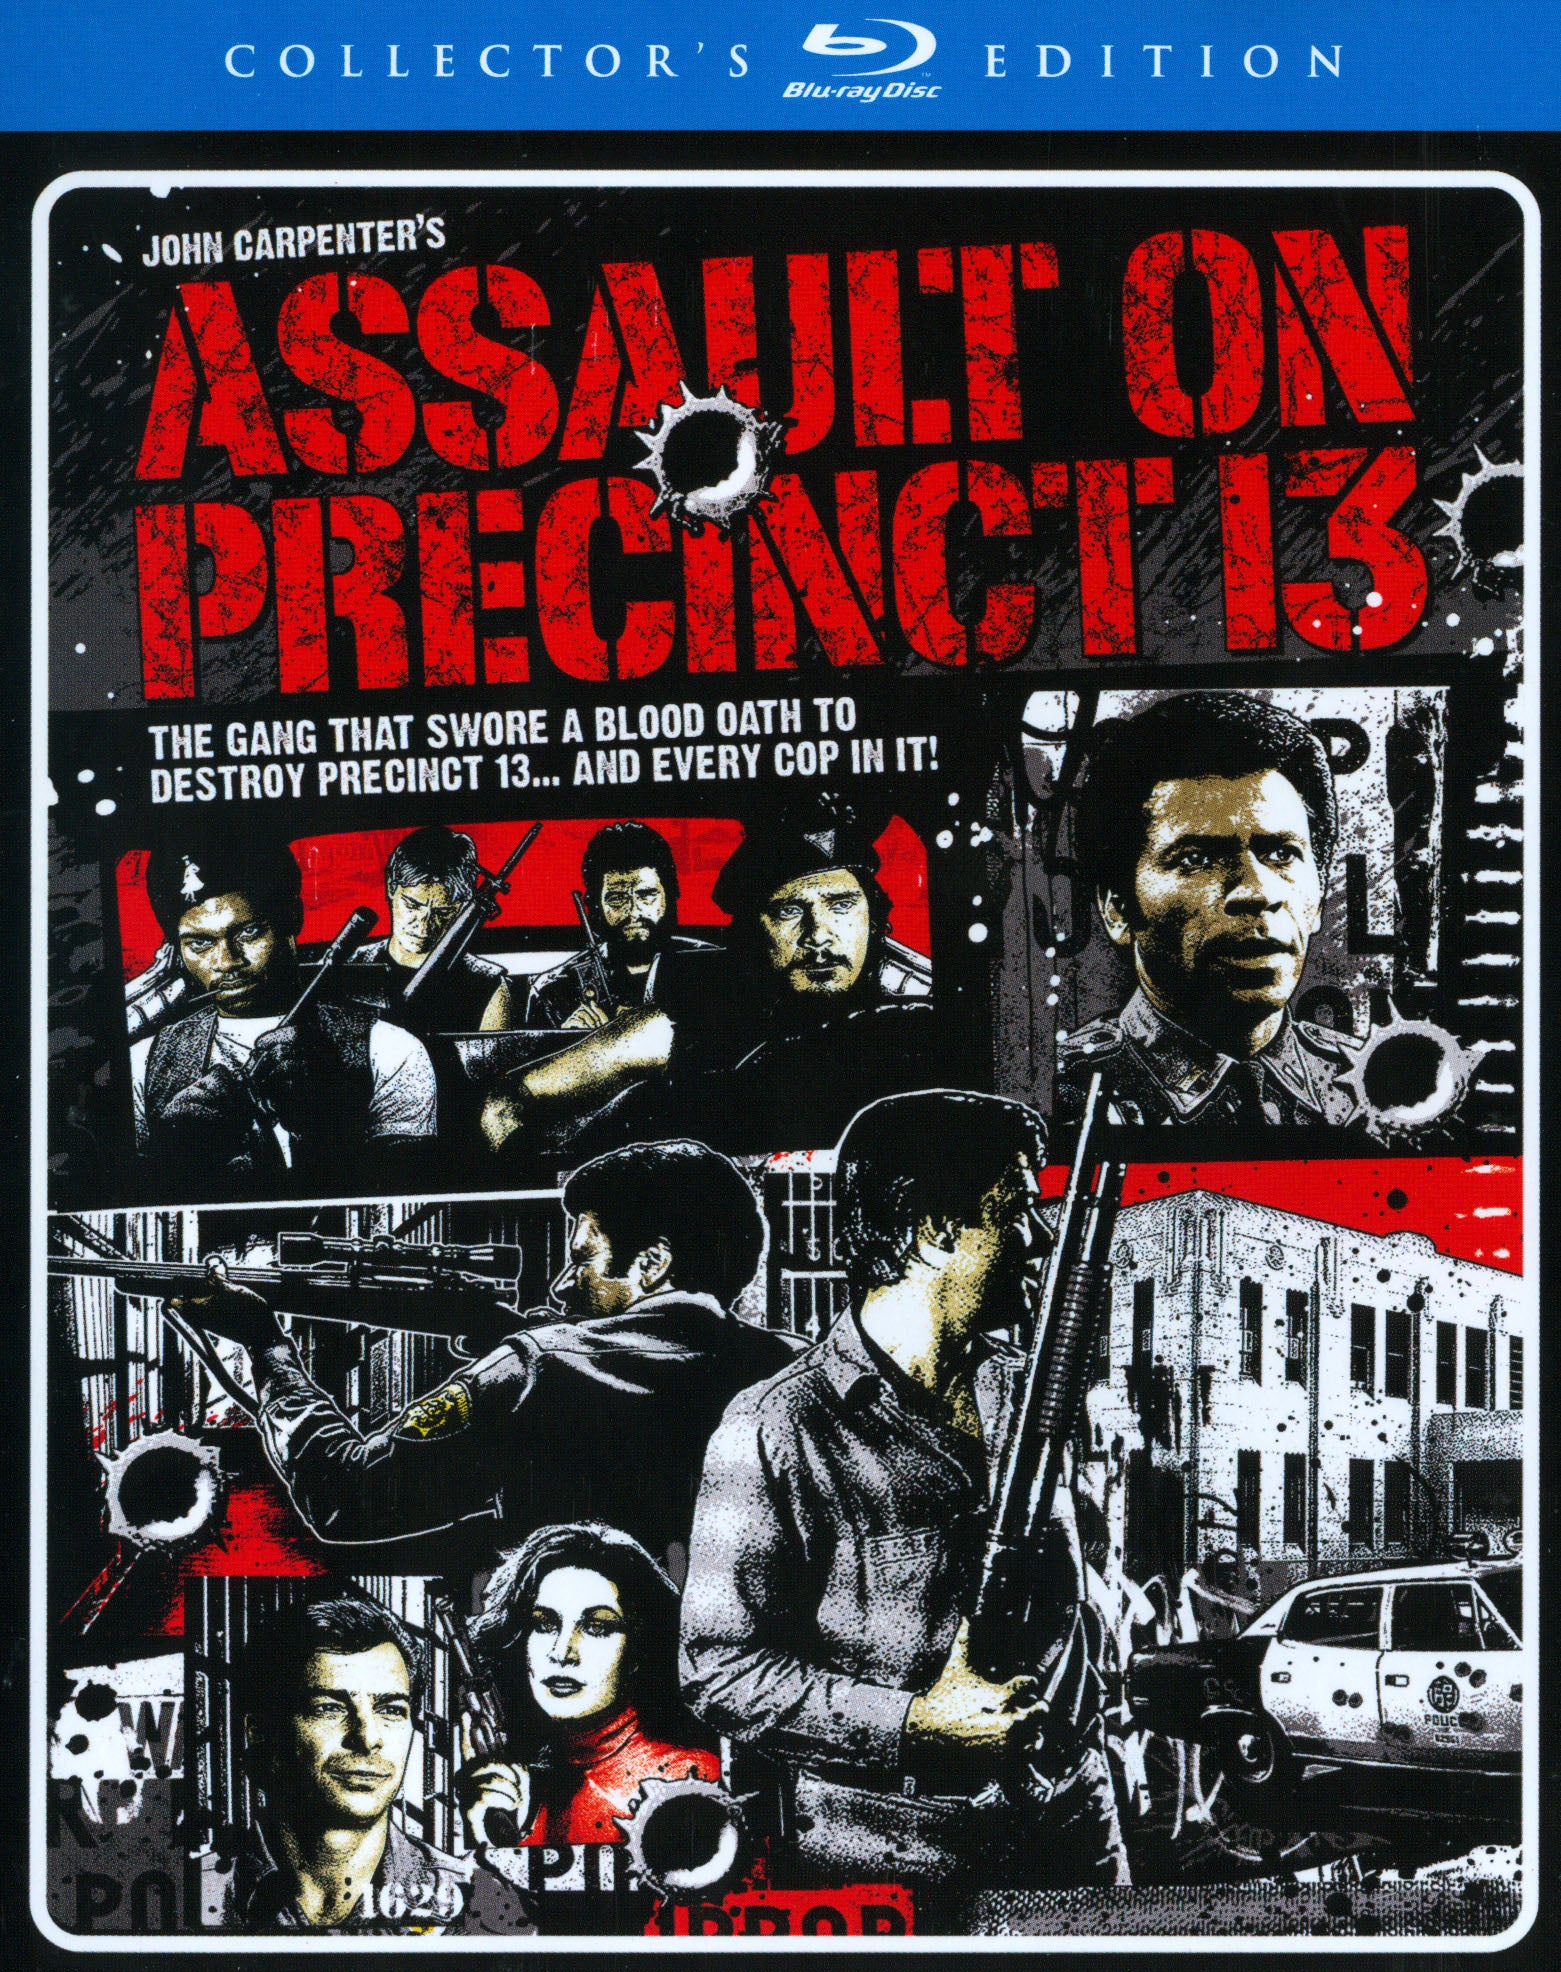 Assault on Precinct 13 [Collector's Edition] [Blu-ray] cover art